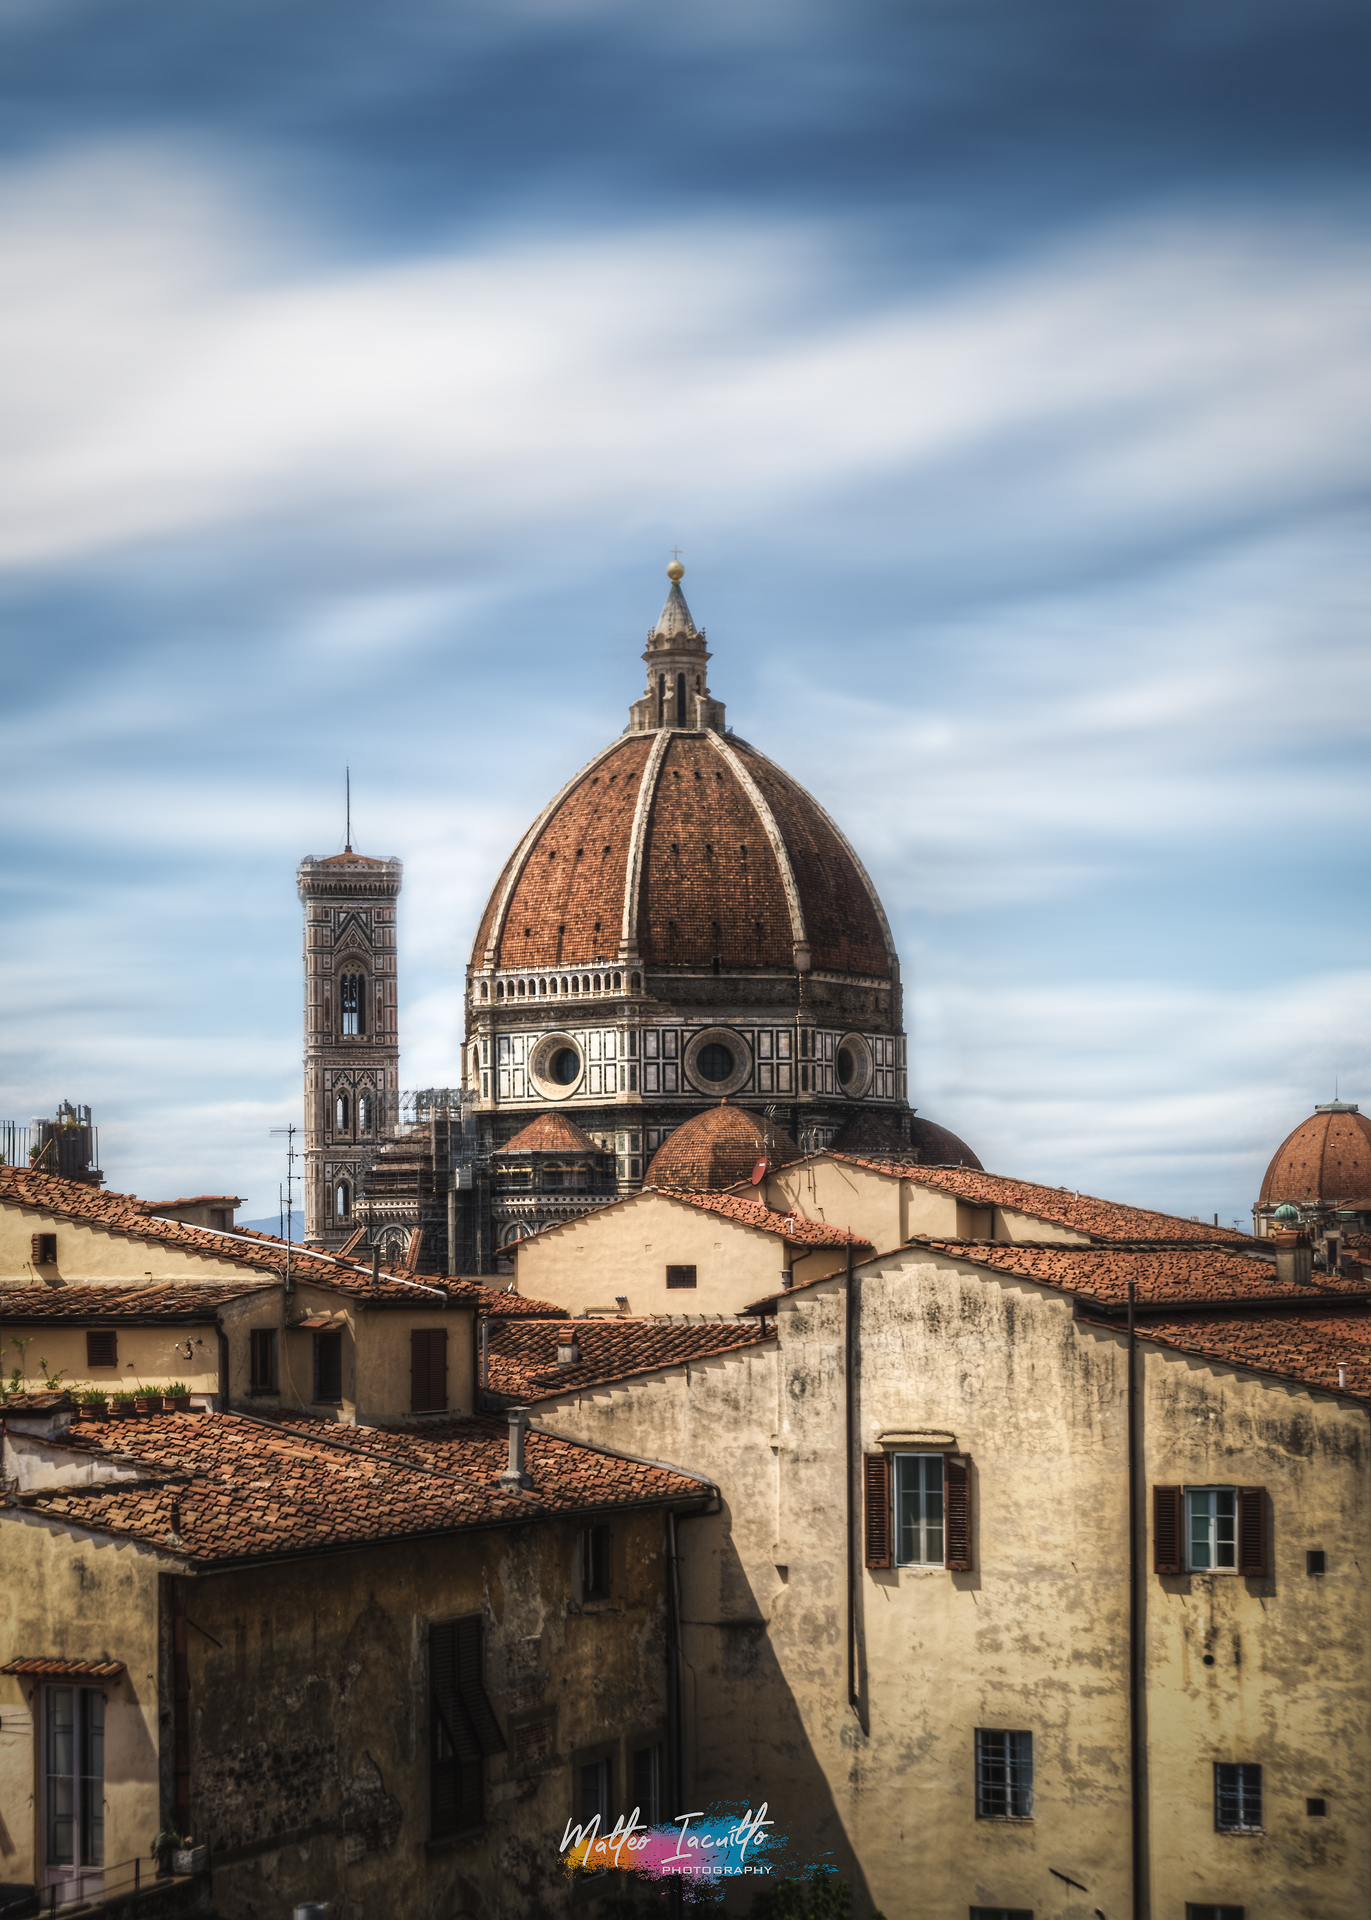 Brunelleschi's dome and Giotto's bell tower...